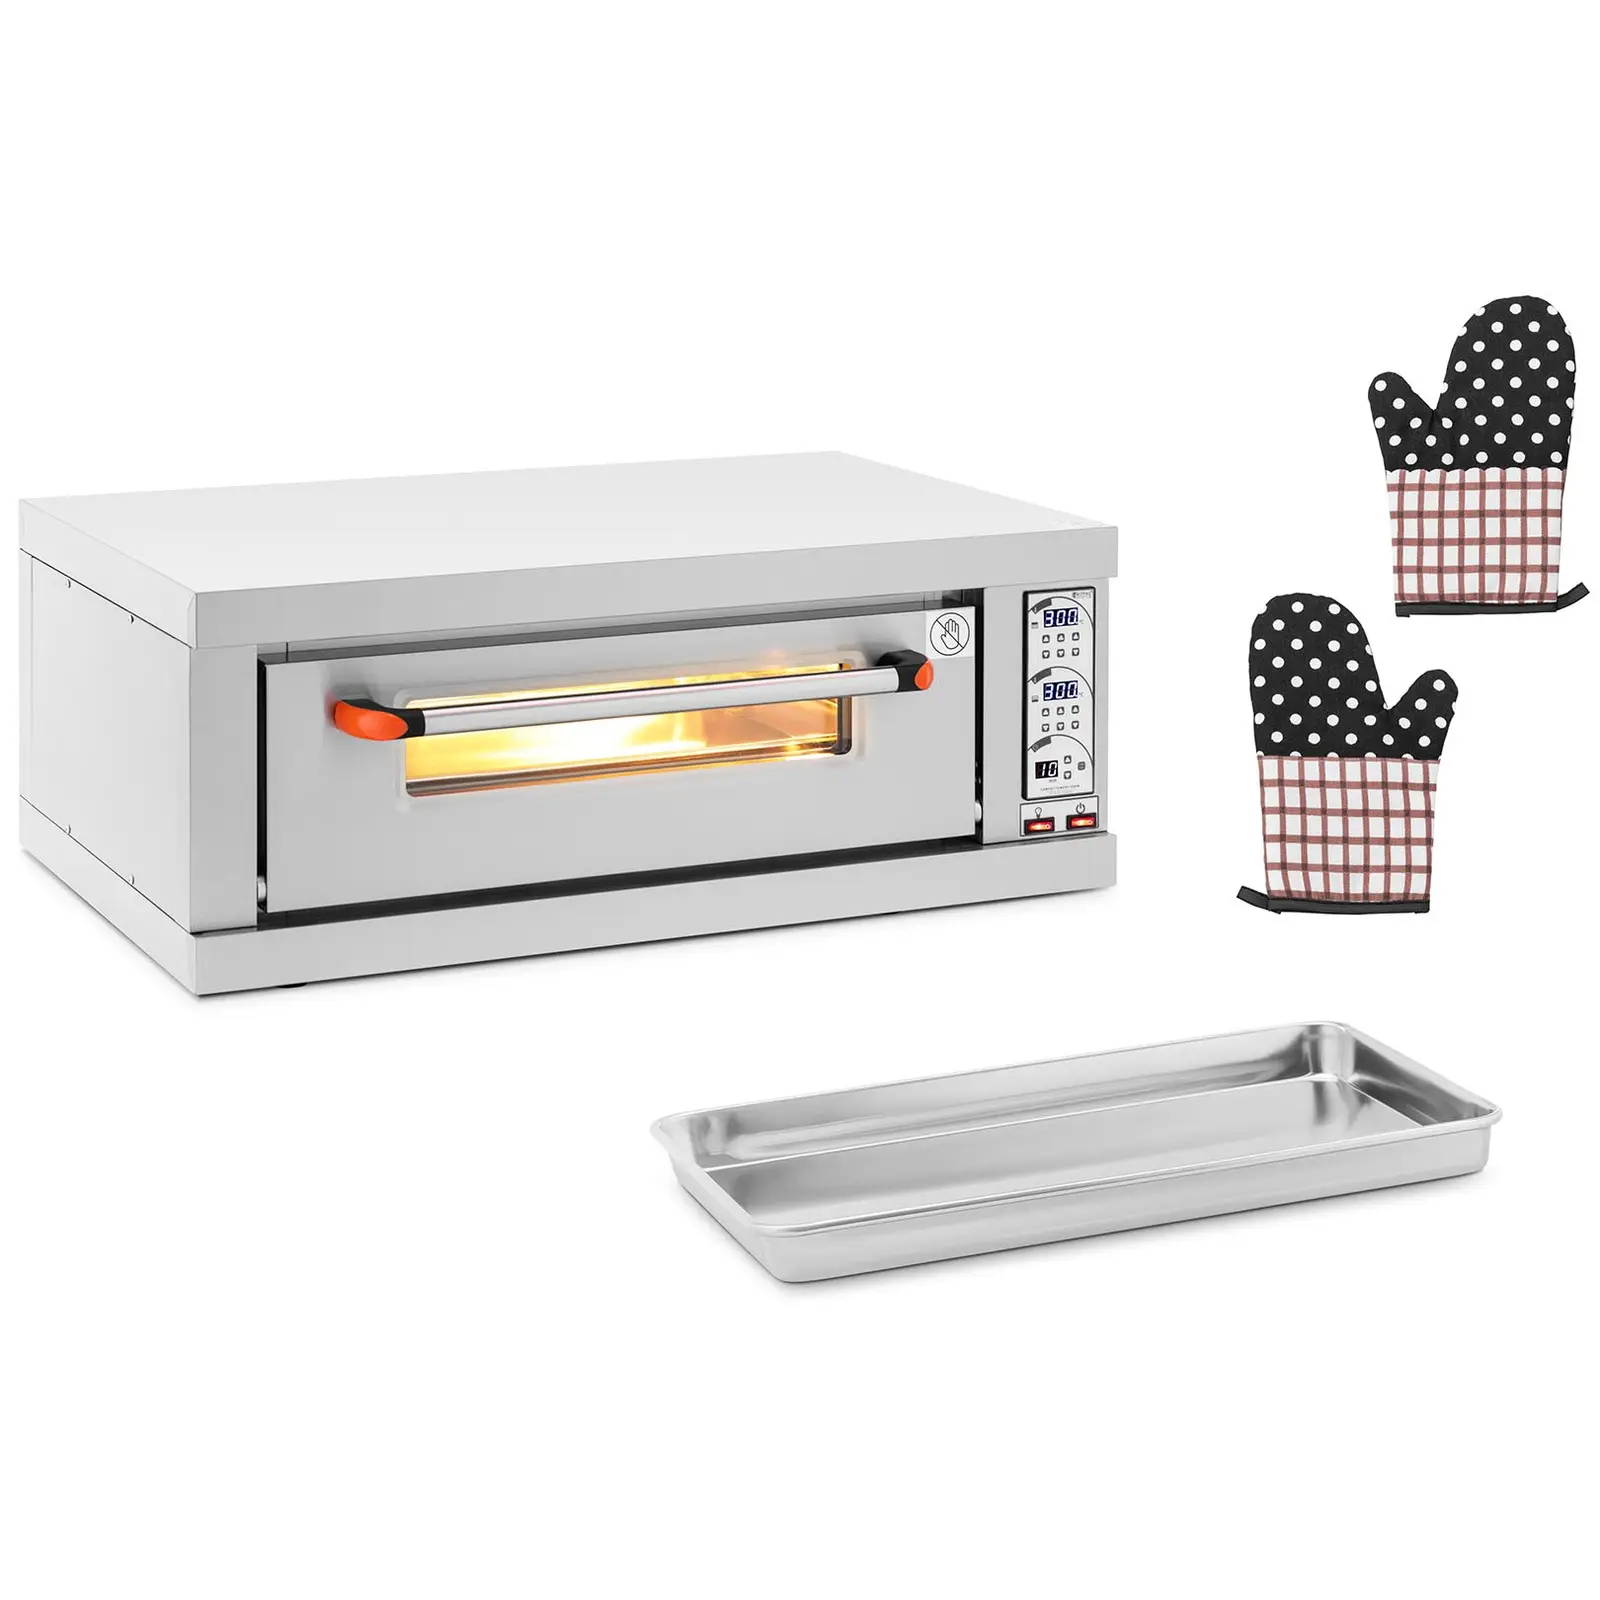 Pizzaugn - 1 kammare - 3200 W - Timer - Royal Catering